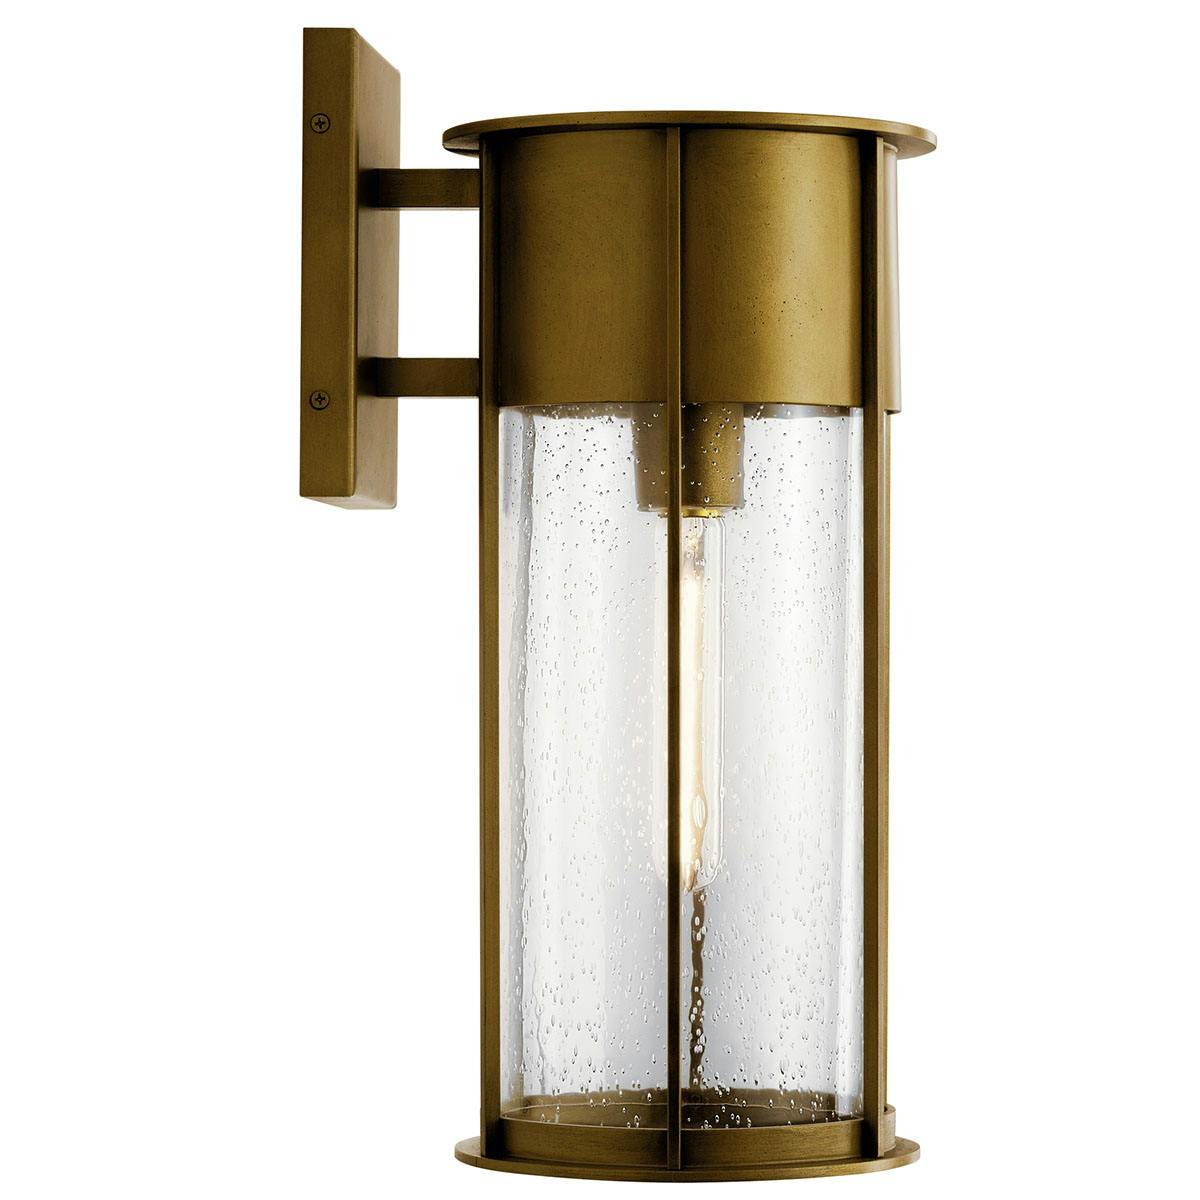 Profile view of the Camillo 18" 1 Light Wall Light Brass on a white background